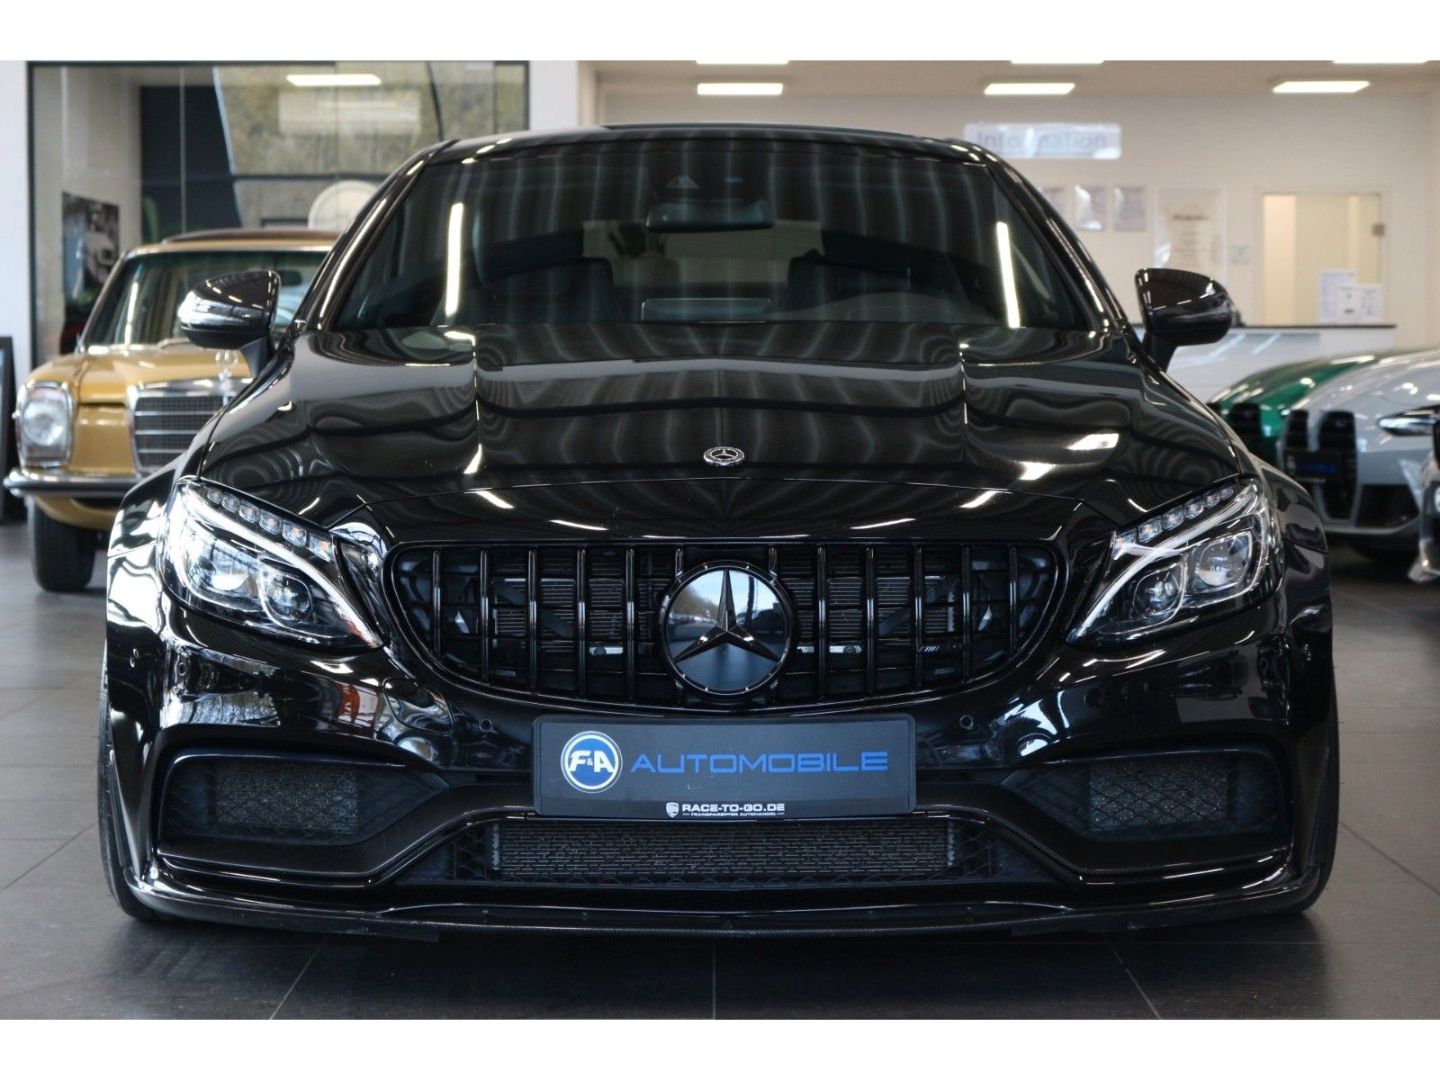 Mercedes-Benz C 63 AMG Coupe VOLL 670 PS Carbon 21 Zoll Voss